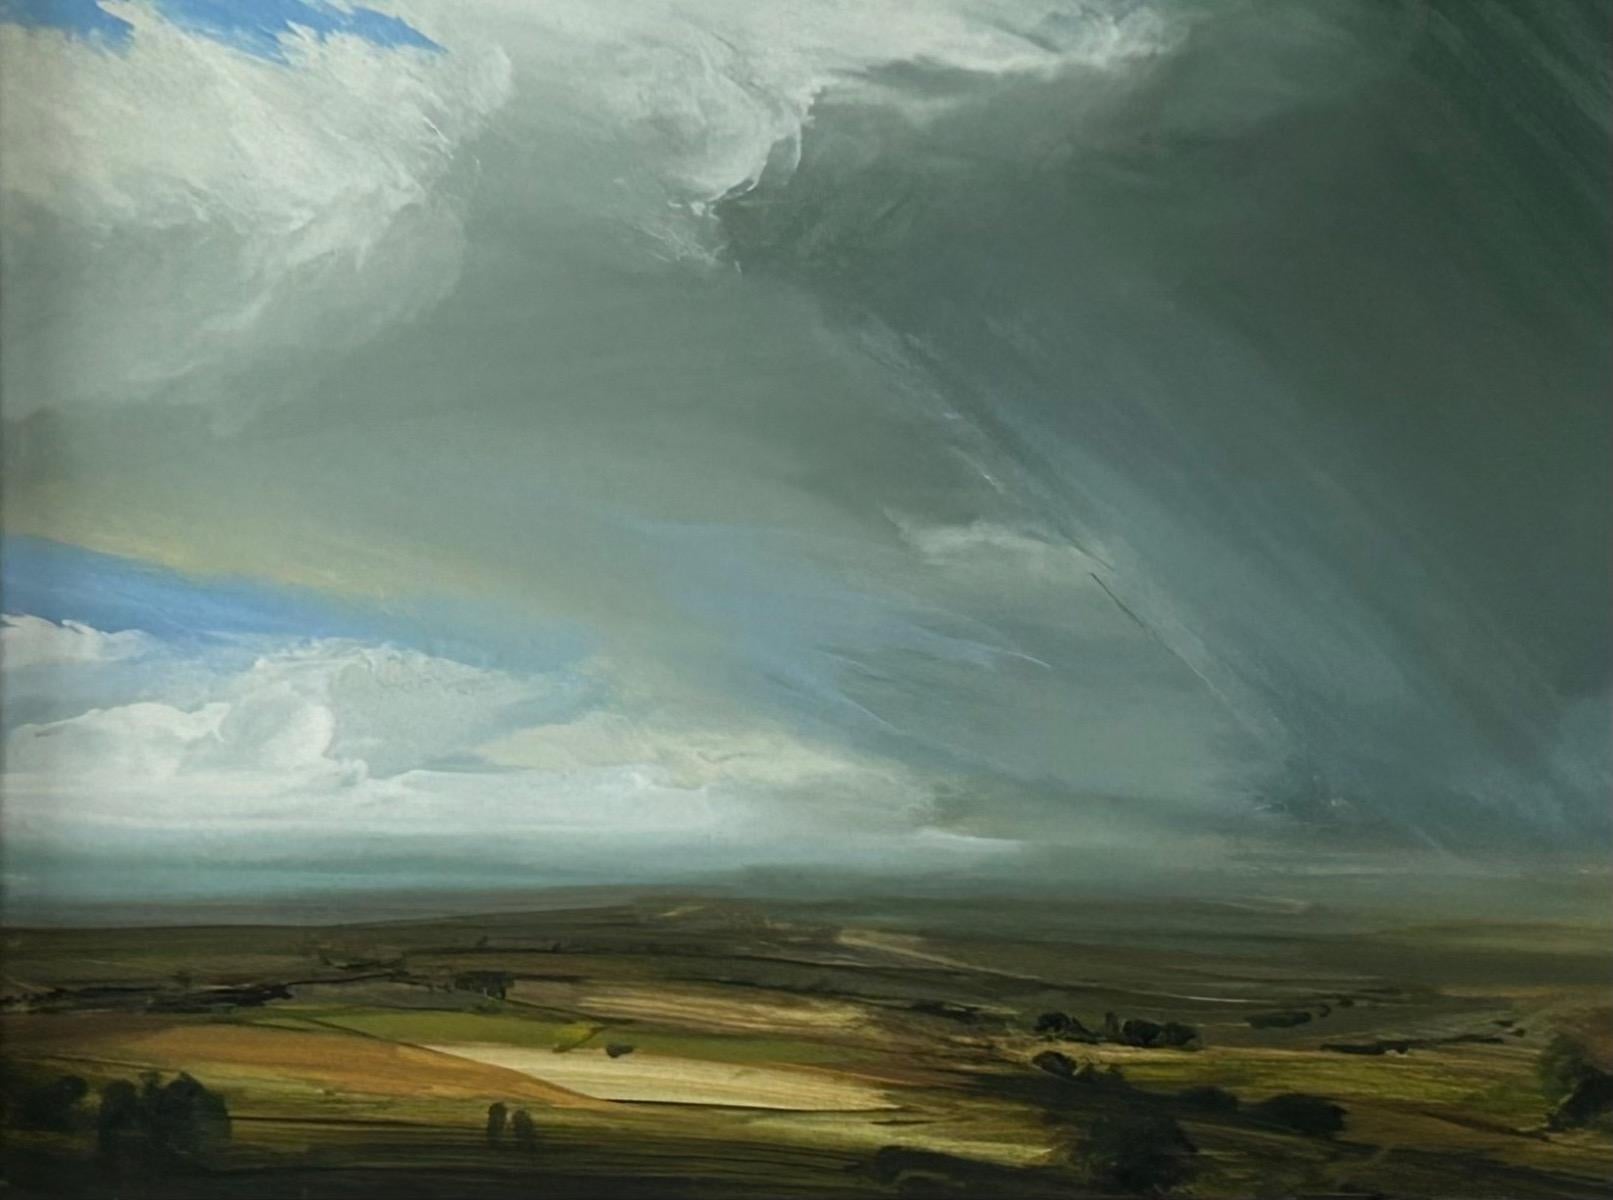 In his Landscape paintings, James Naughton finds a constantly engaging conversation, a dialogue between light, air, and the earth. The subject has been a fascination which has established his reputation and crucial in developing his painting